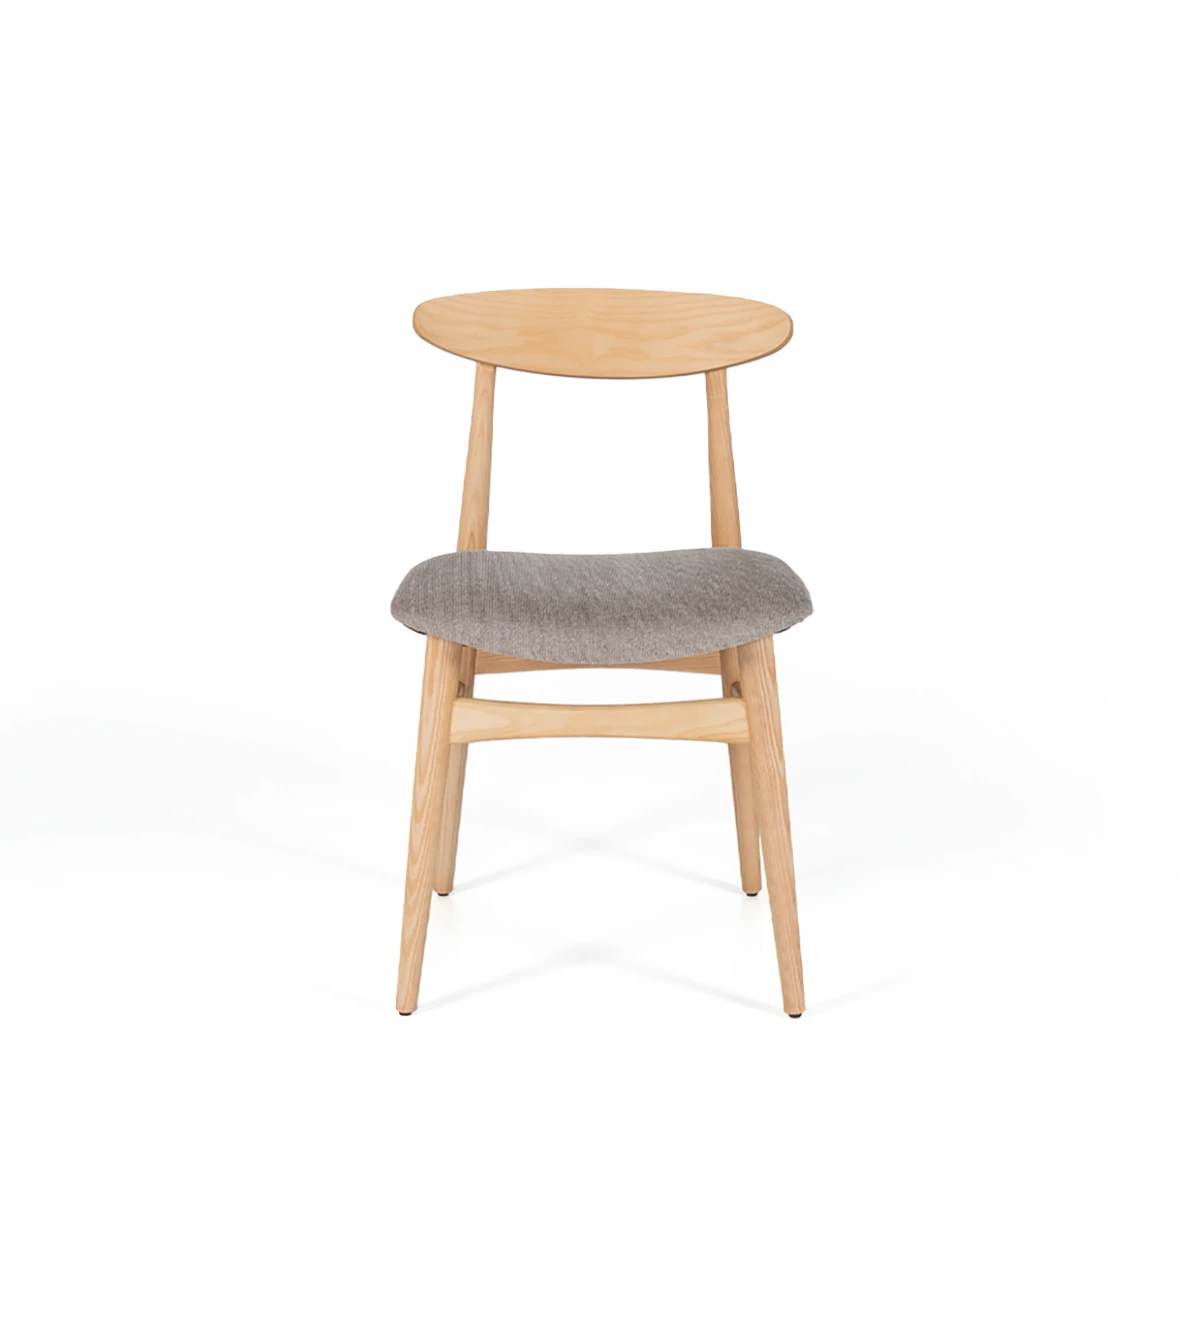 Natural color ash wood chair with fabric upholstered seat.